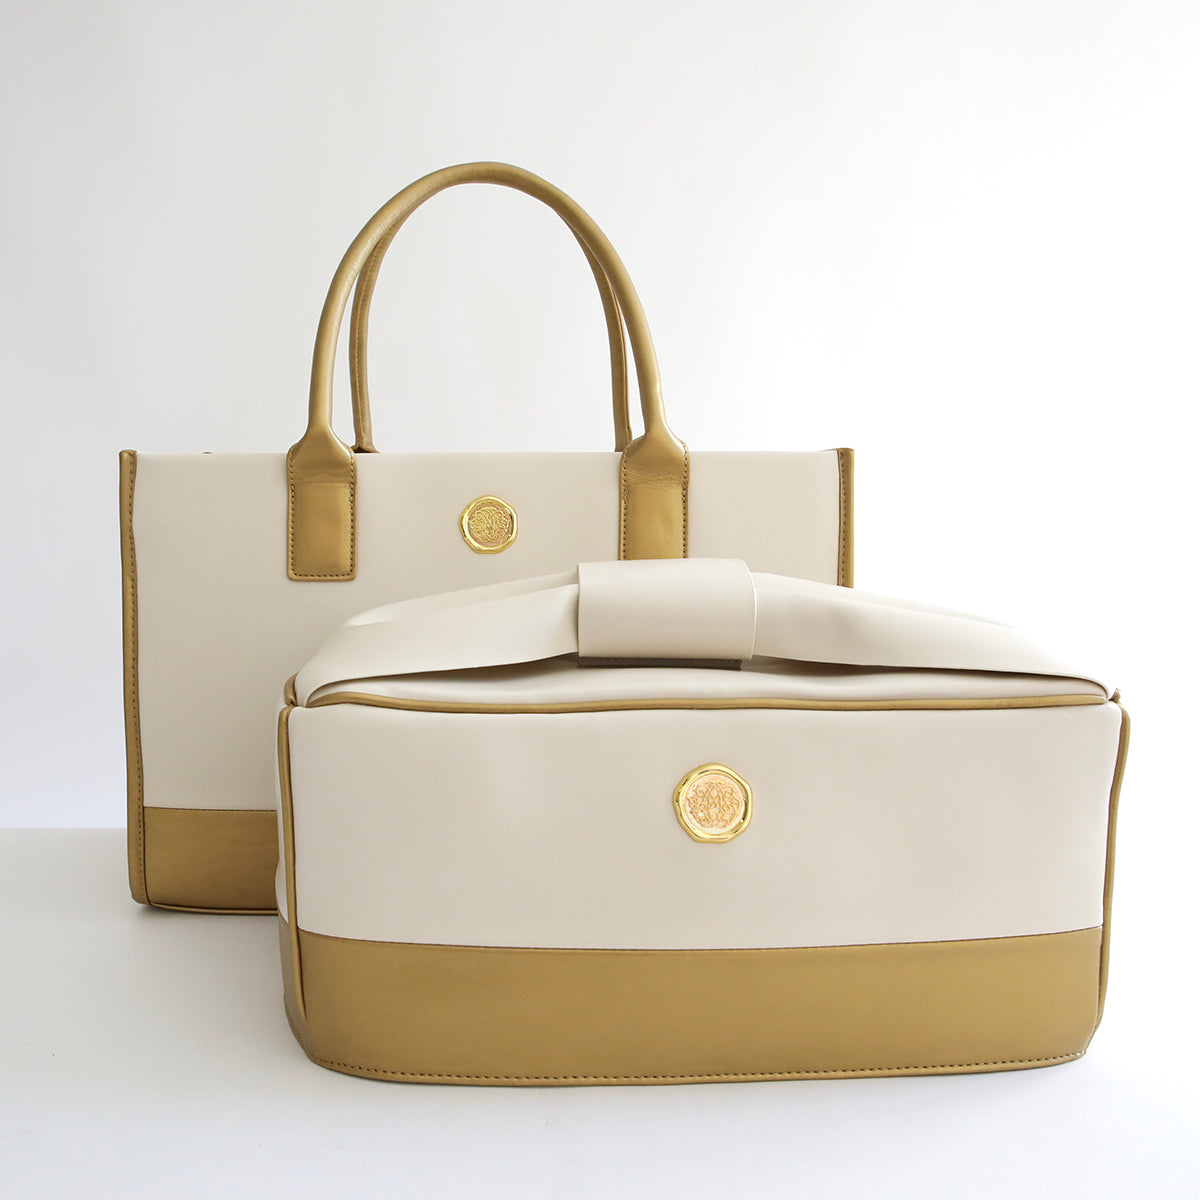 Two Empress Tote bags on a white surface.